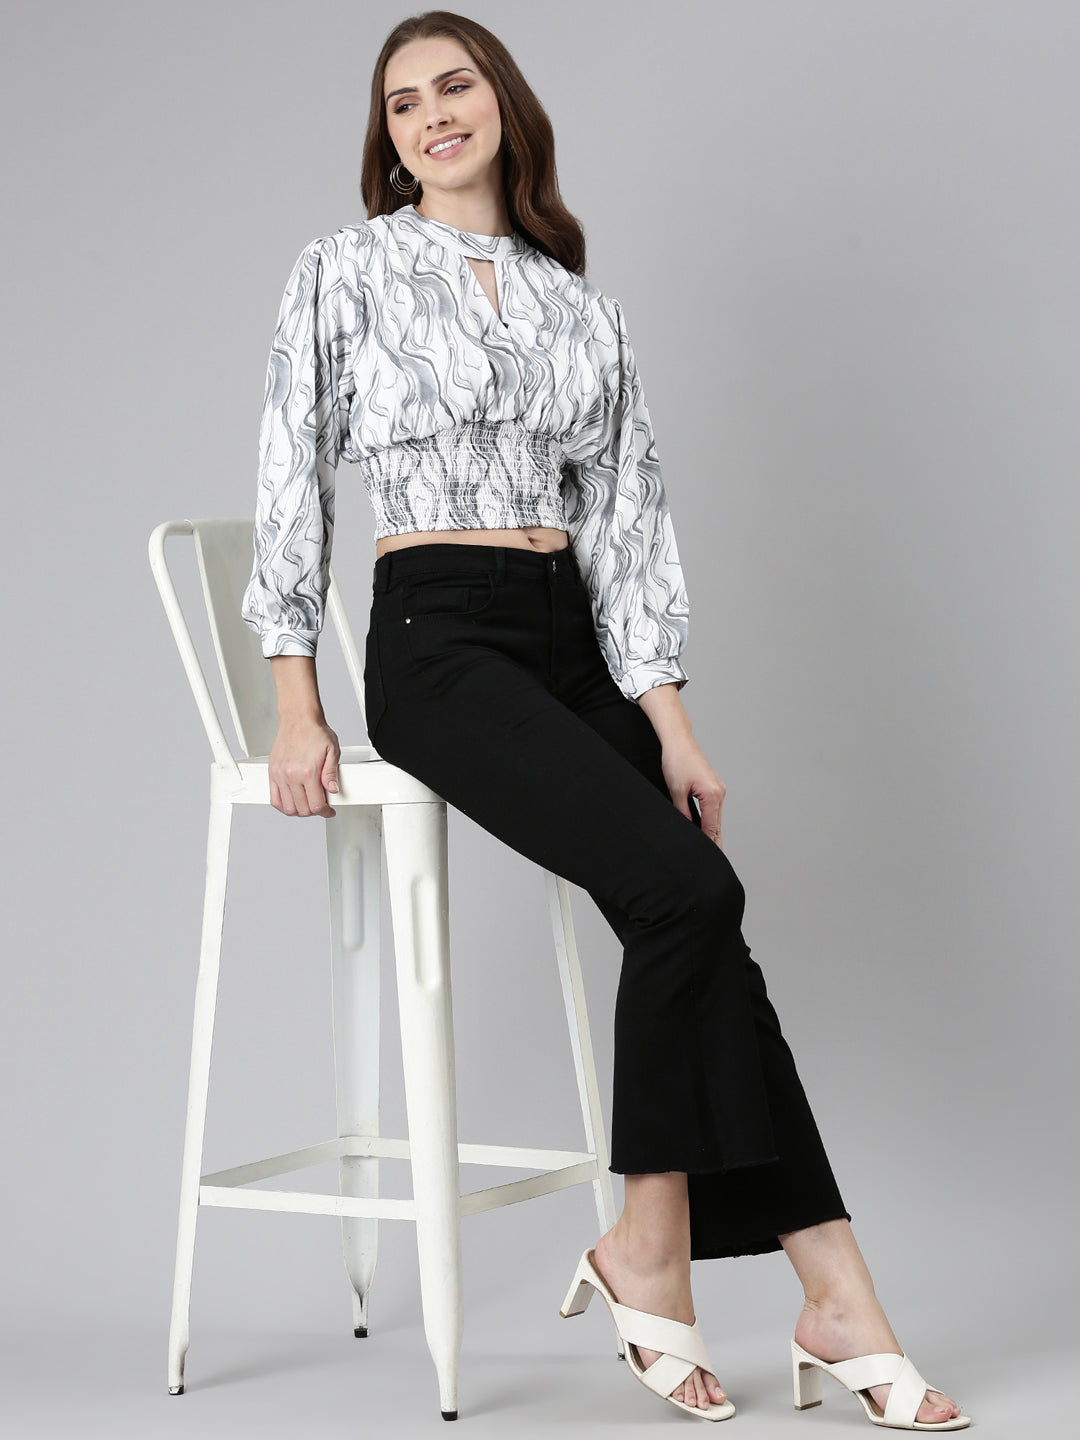 Keyhole Neck Cuffed Sleeves Abstract Cinched Waist Grey Crop Top